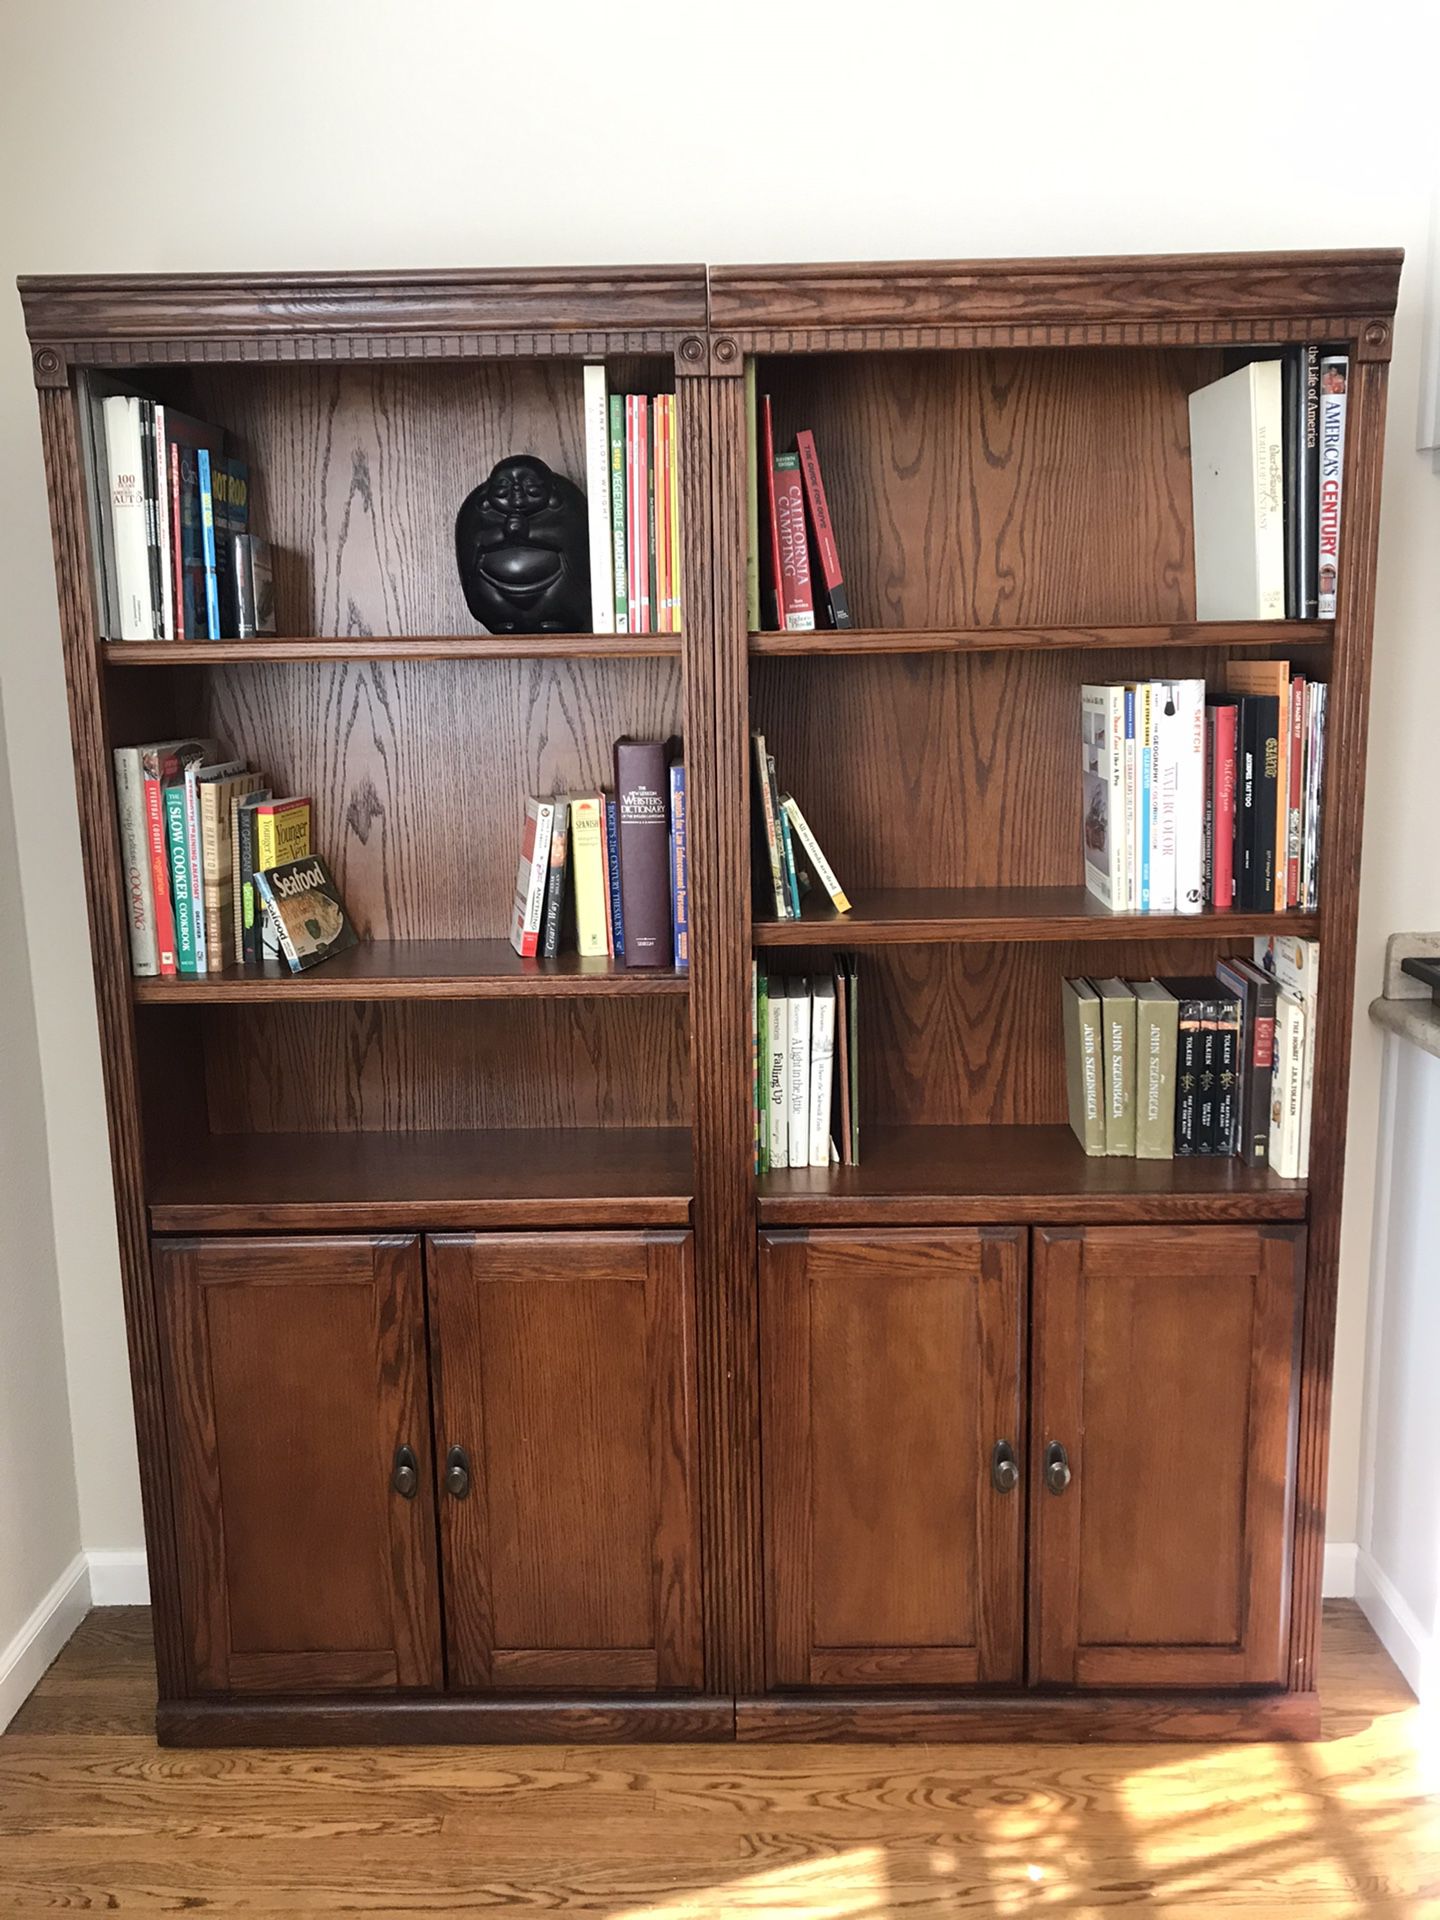 Matching wood book shelves with storage cabinets